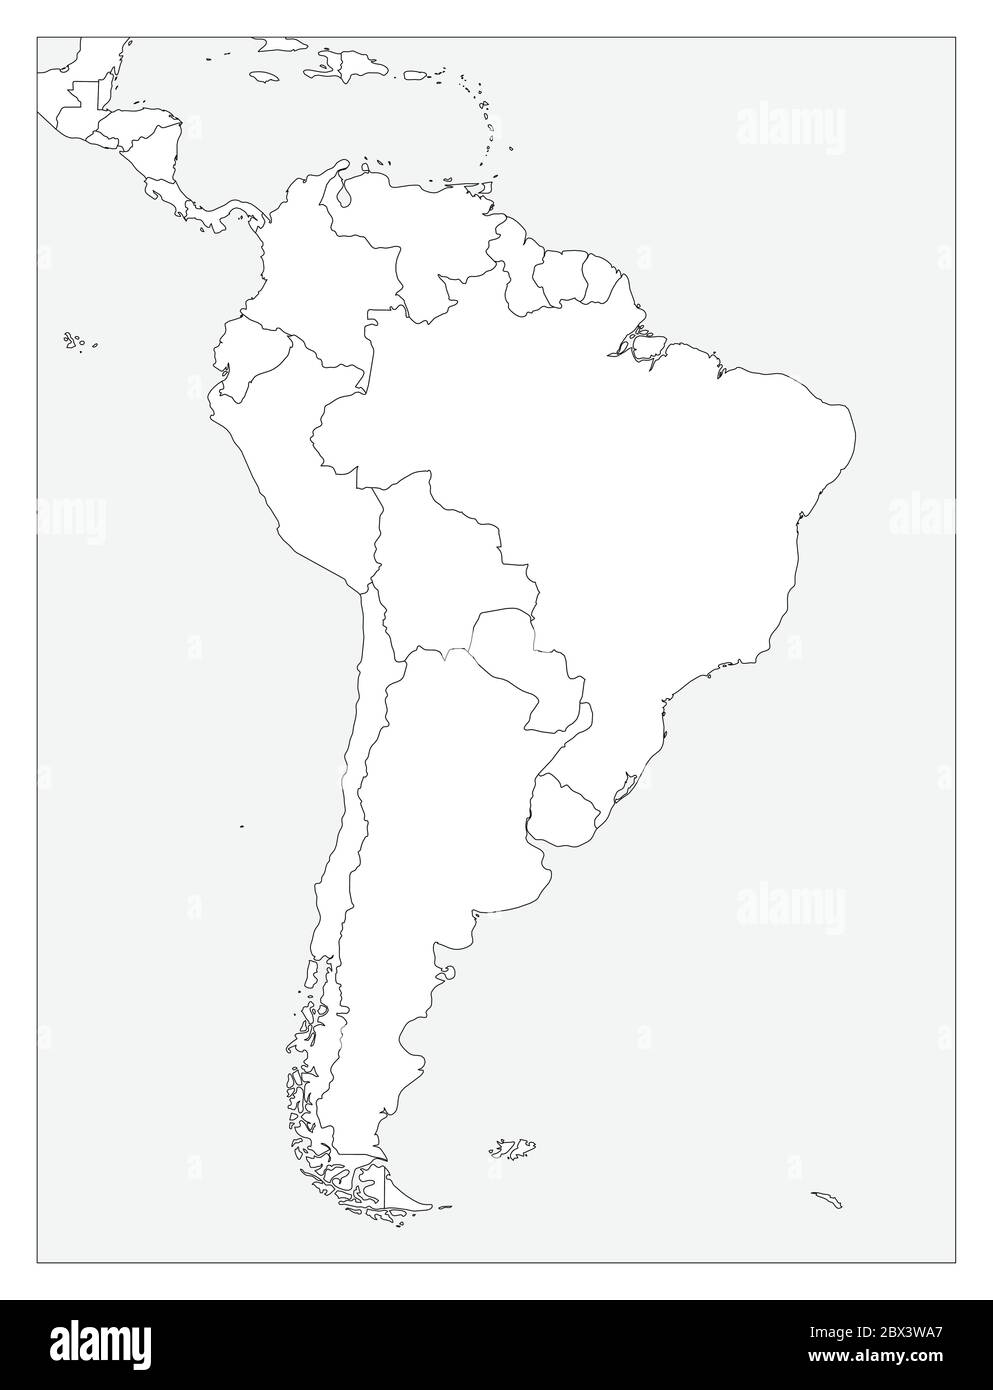 Blank political map of South America. Simple flat vector outline map. Stock Vector